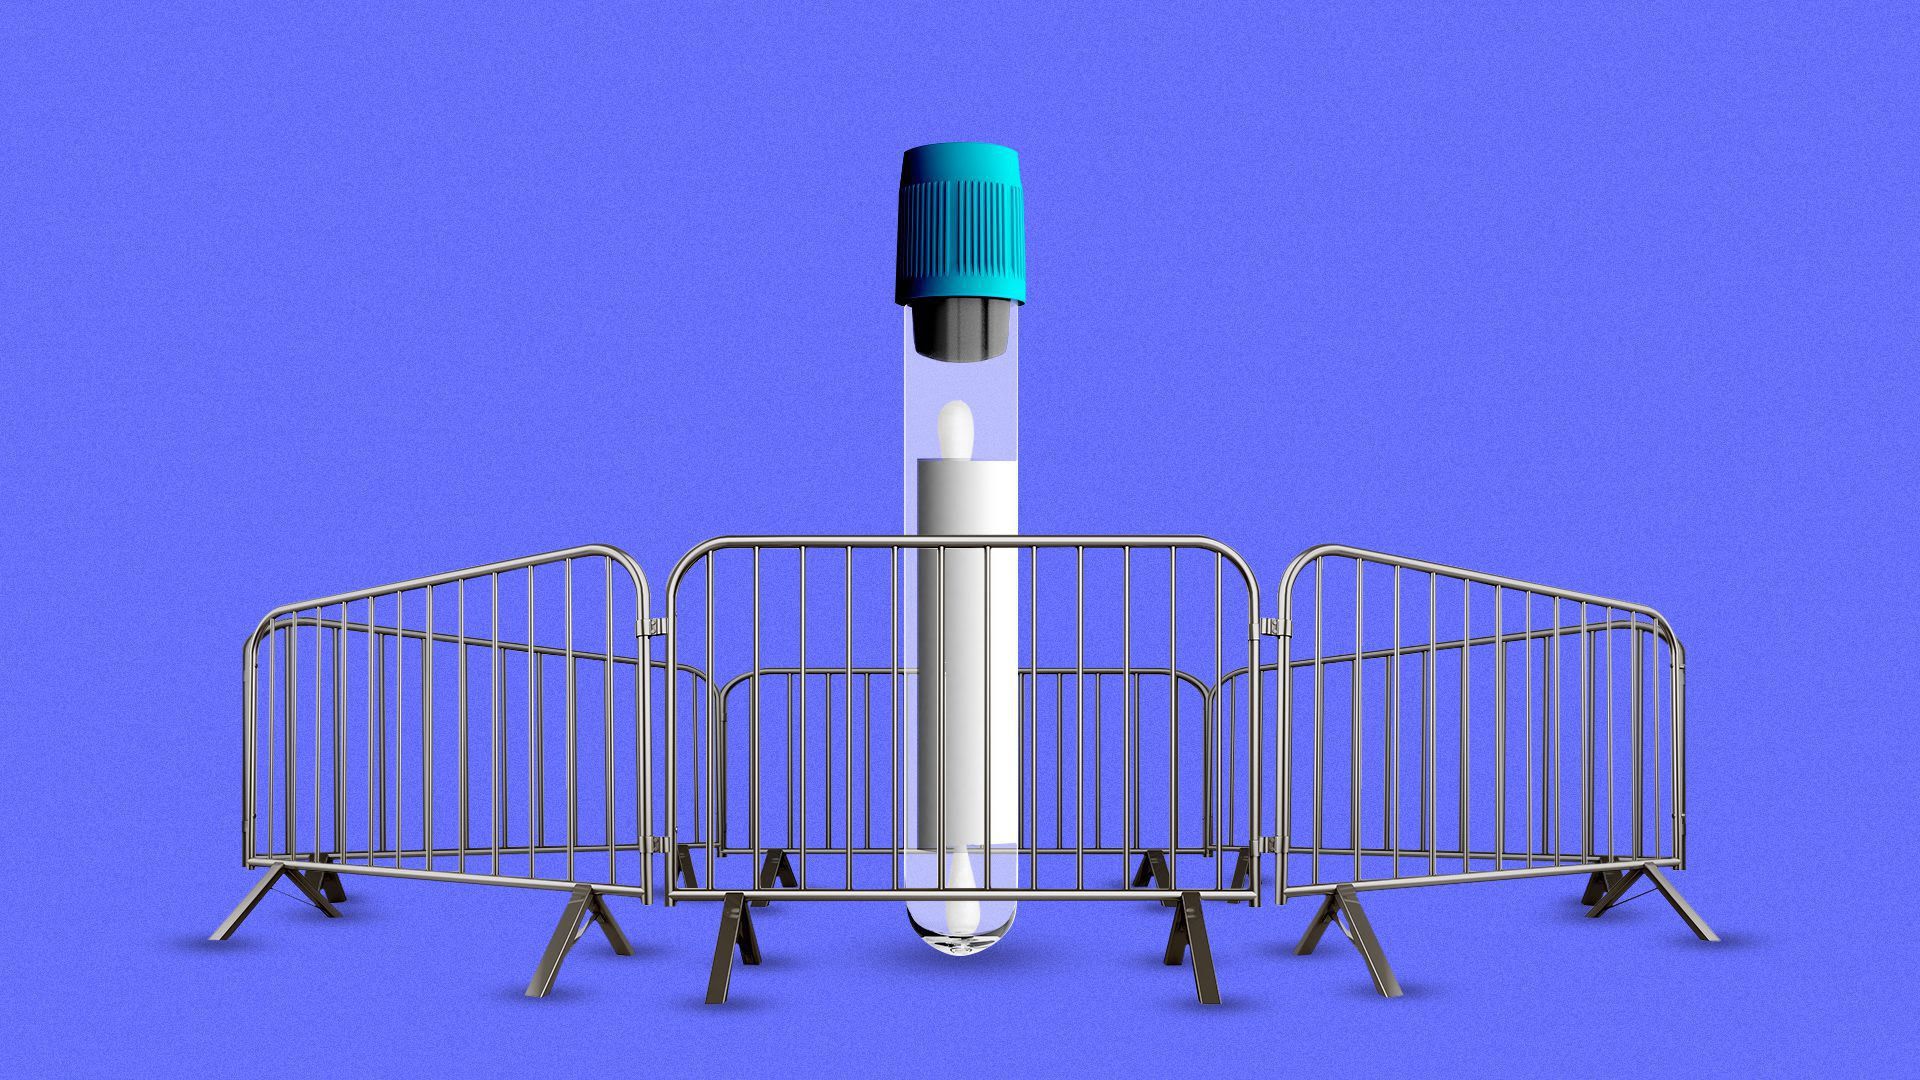 An illustration of a test tube behind a gate